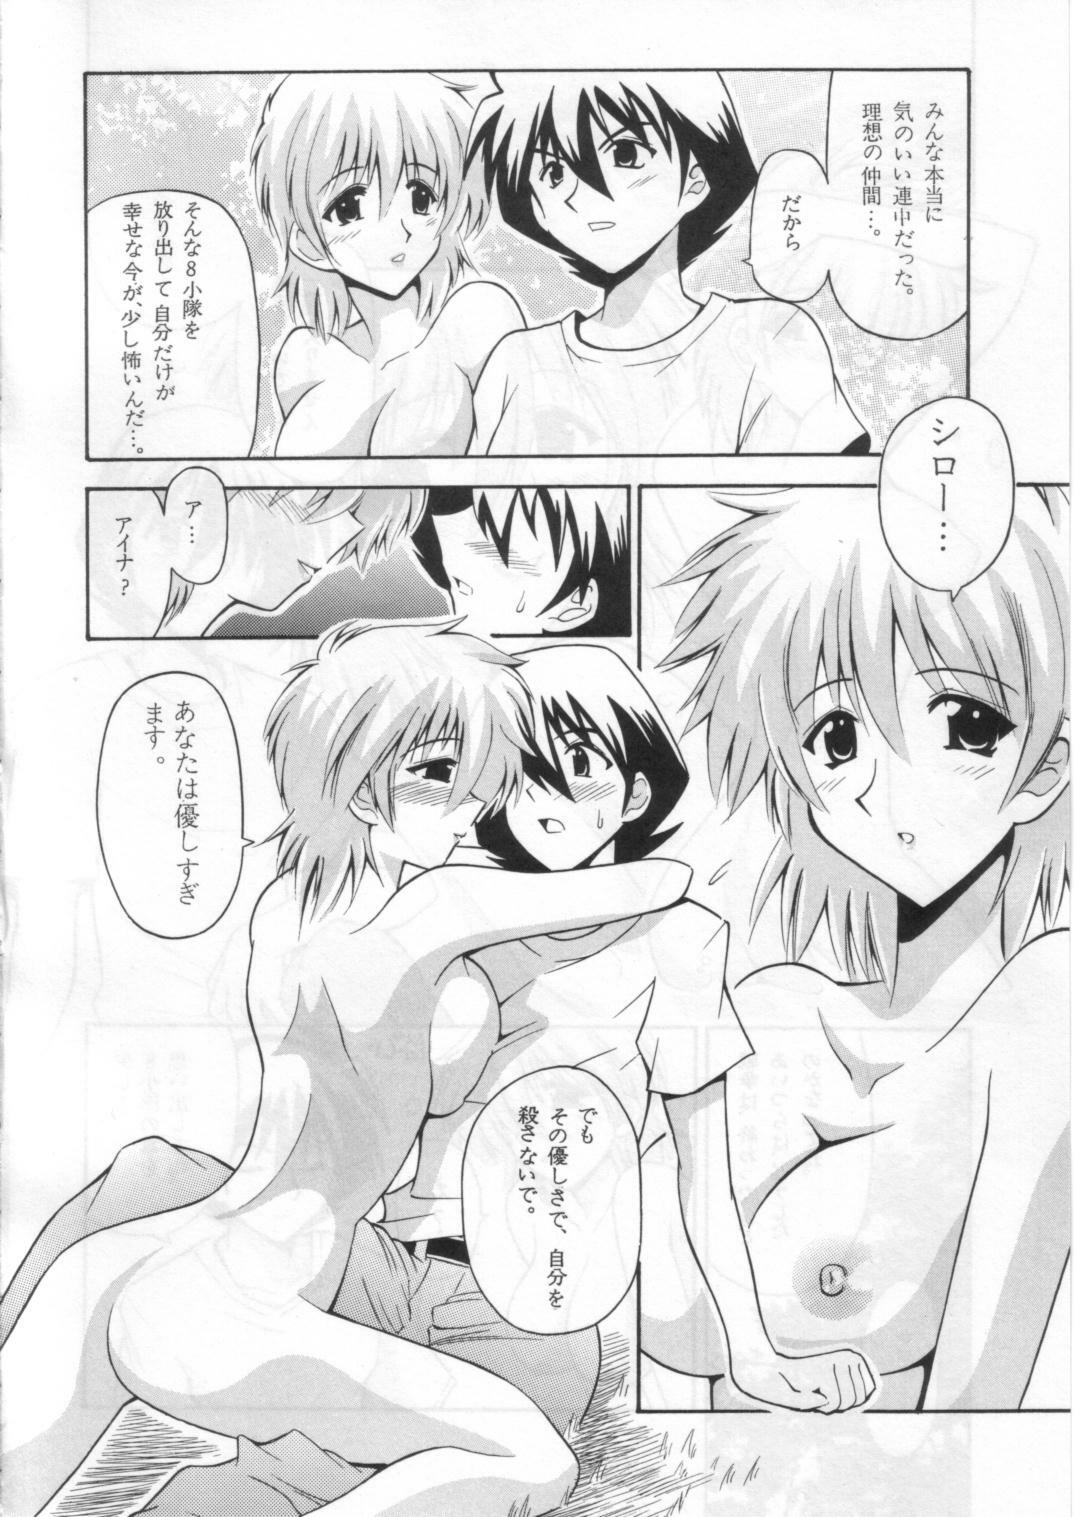 (SC19) [Leaz Koubou (Oujano Kaze)] ONE YEARS AFTER (Mobile Suit Gundam: The 08th MS Team) page 3 full